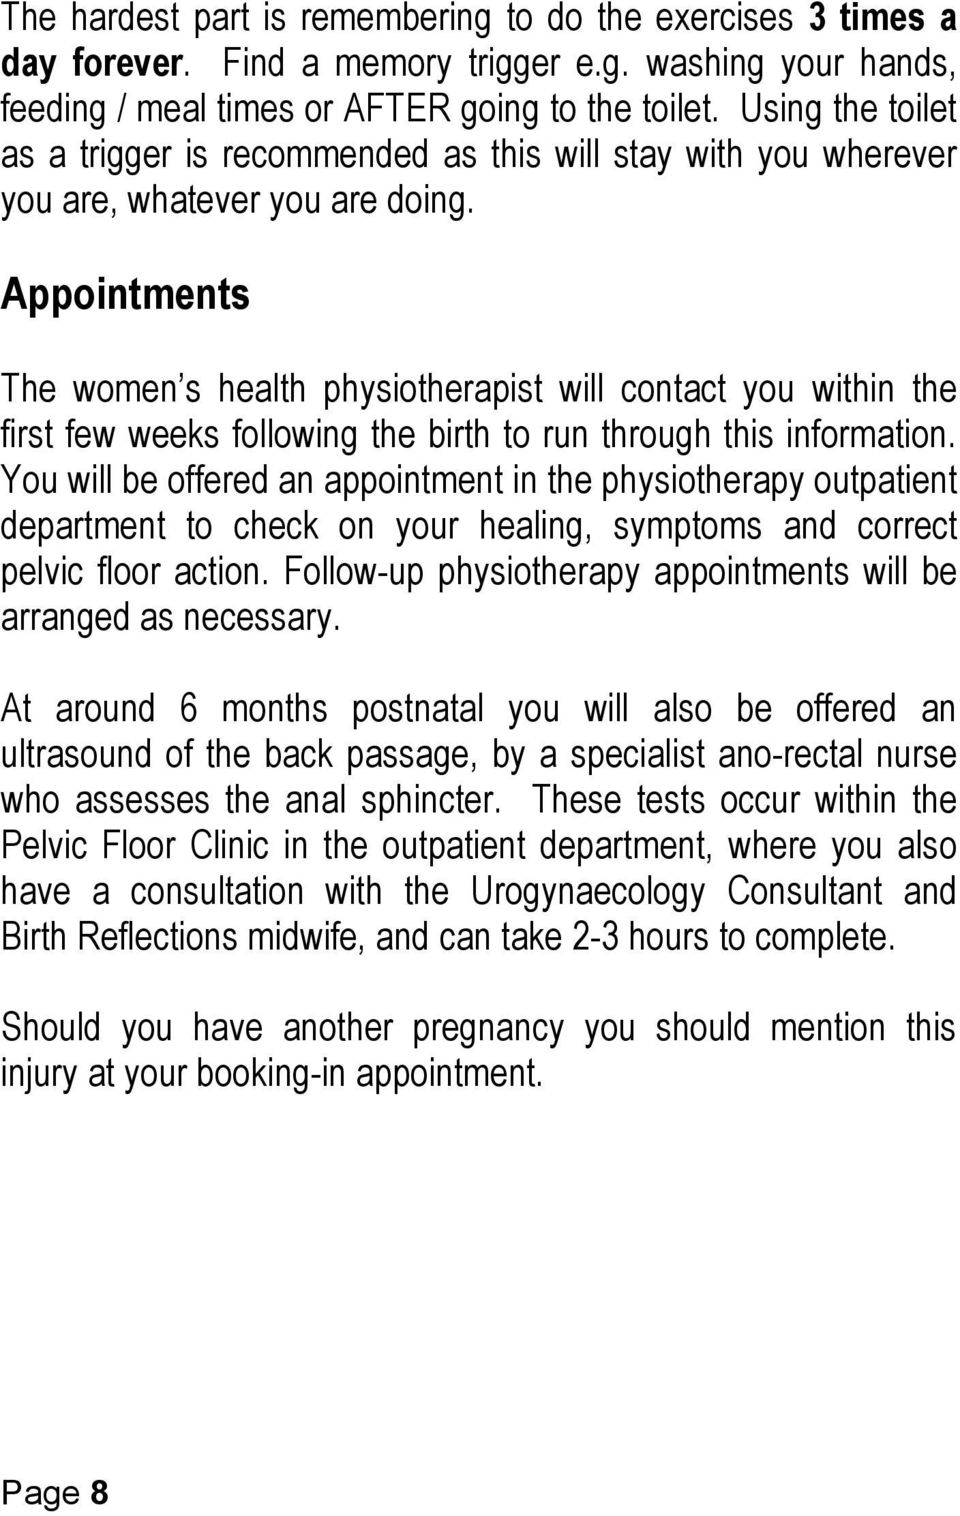 Appointments The women s health physiotherapist will contact you within the first few weeks following the birth to run through this information.